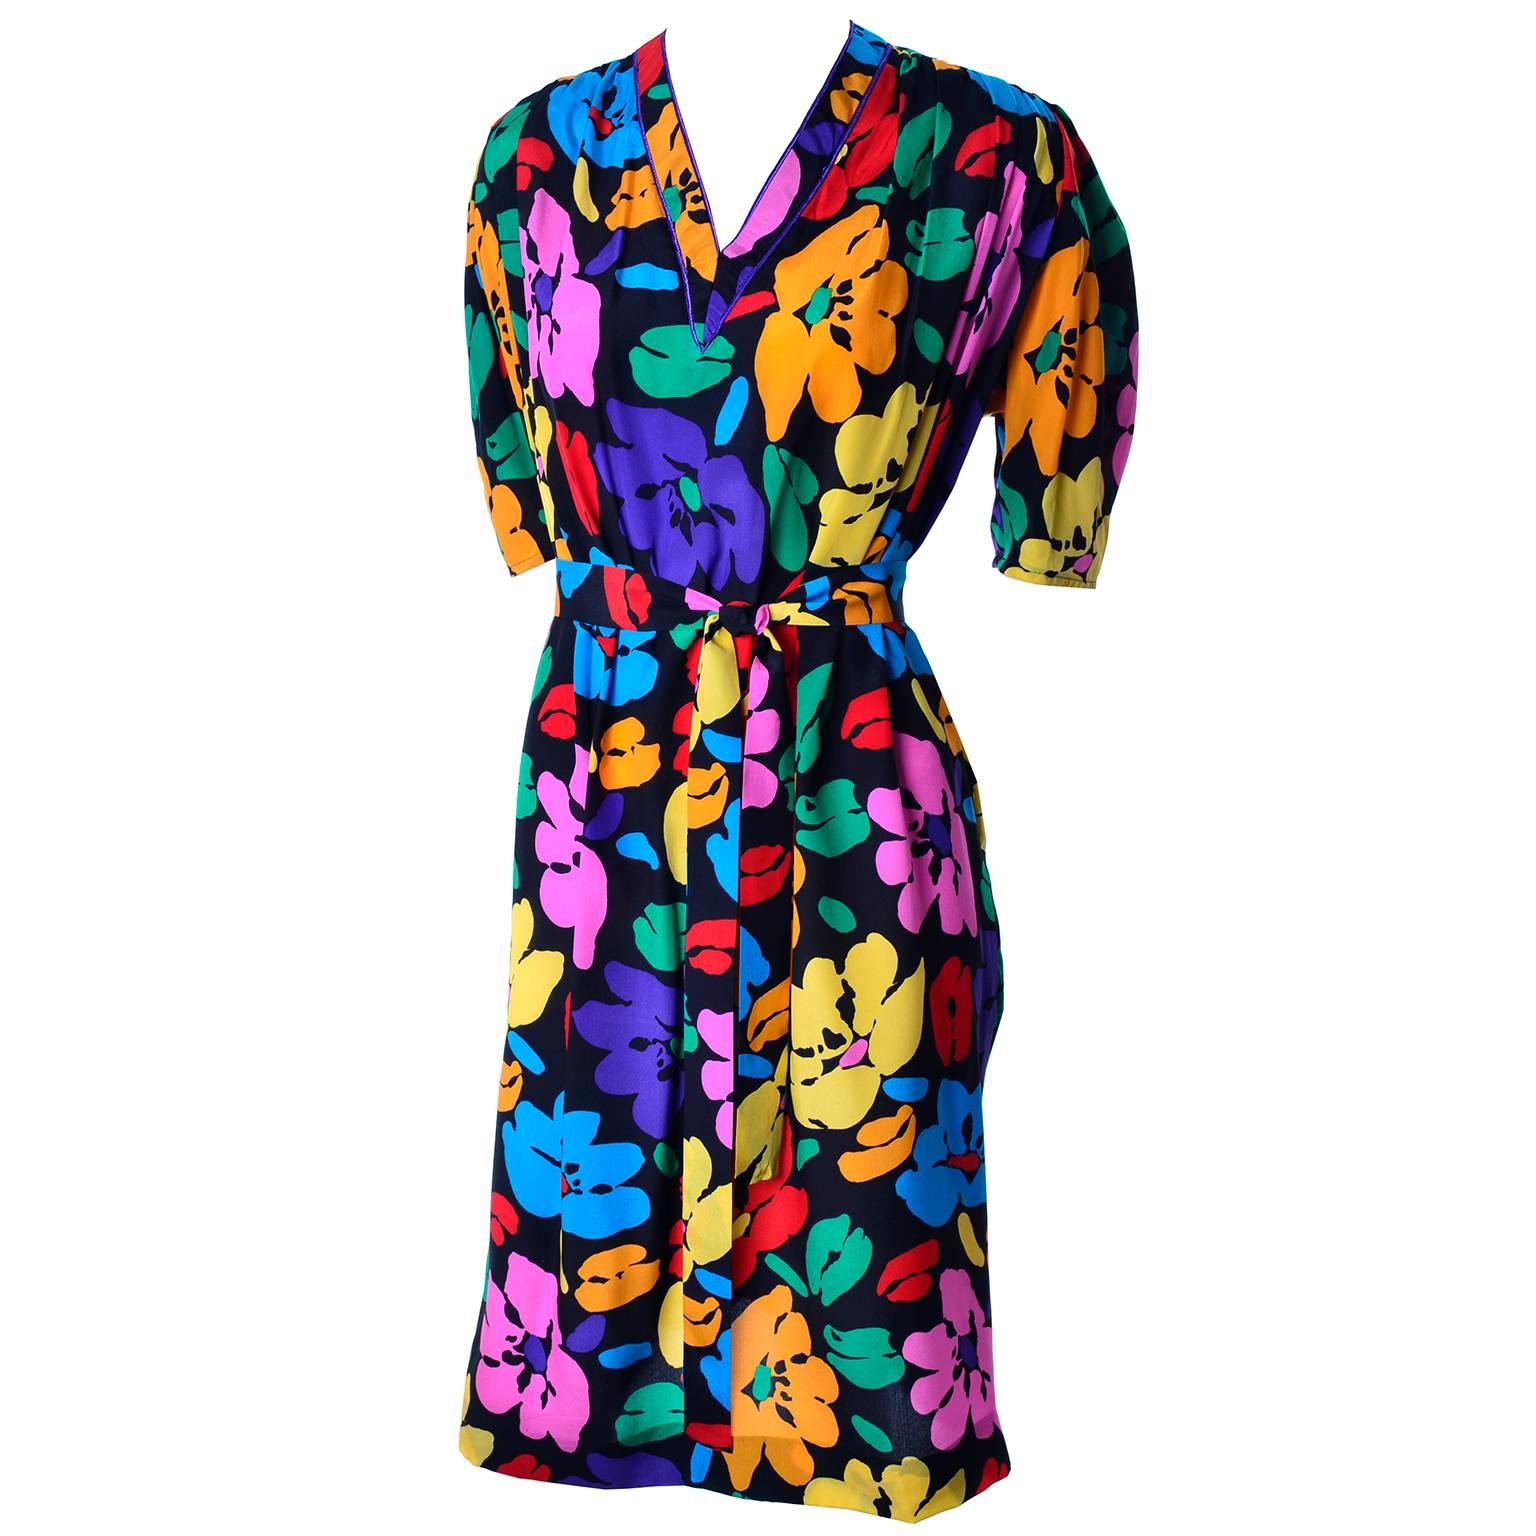 This Emaunel Ungaro Parallele dress is in a wonderful bright bold floral silk print. The dress fits very loosely and can be worn with or without its fabric tie. The beautiful floral print has shades of purple, red, blue, yellow and orange flowers